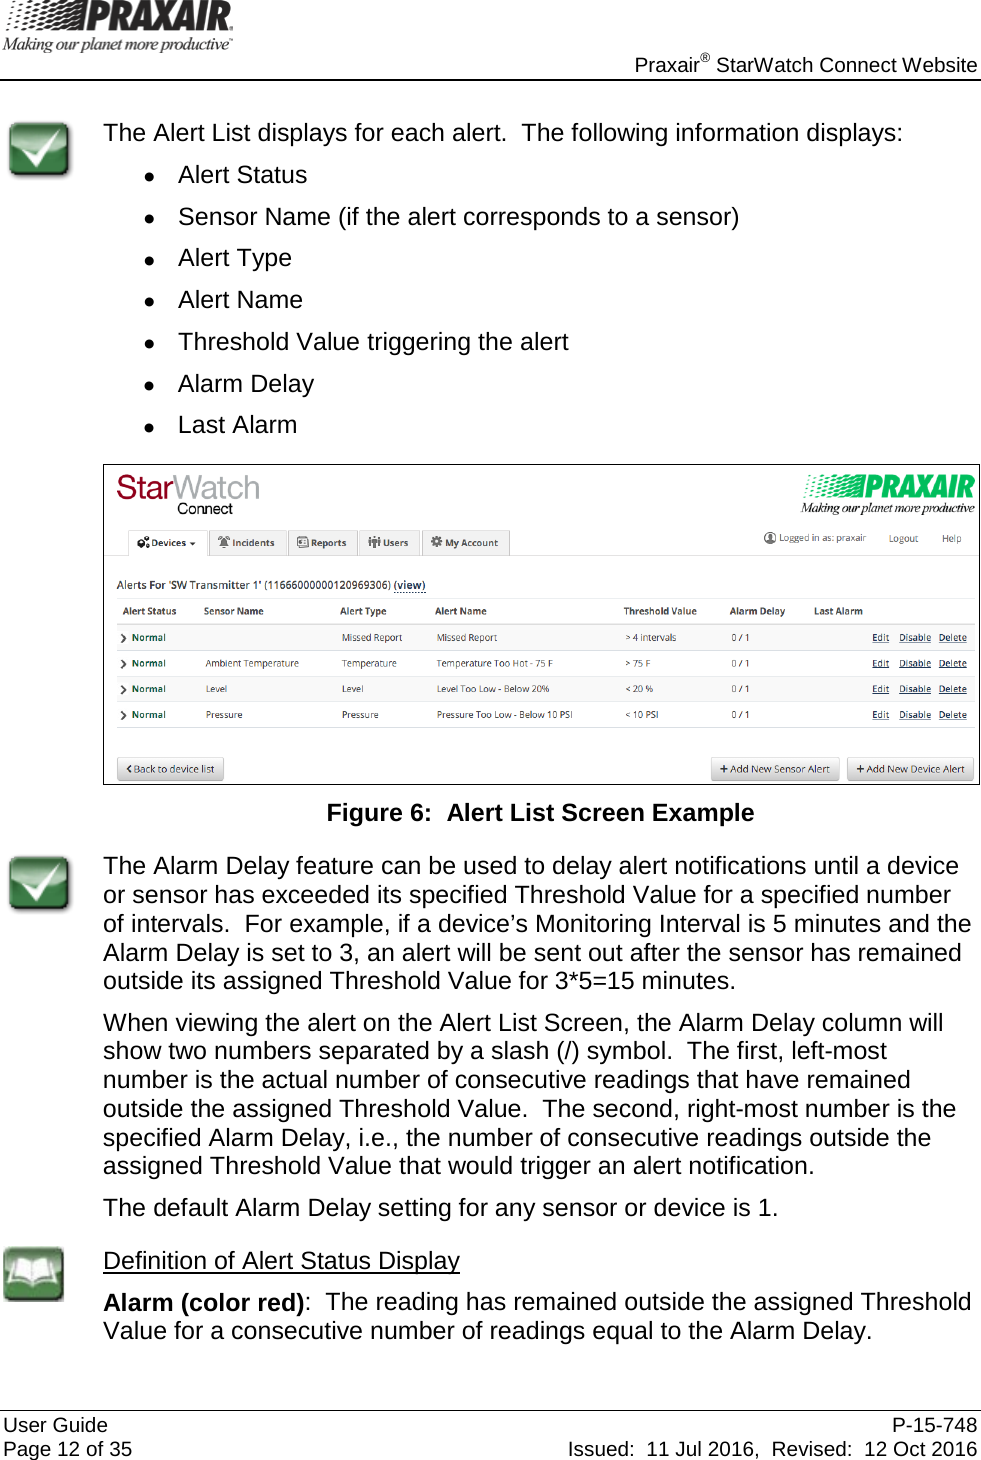    Praxair® StarWatch Connect Website User Guide  P-15-748 Page 12 of 35 Issued:  11 Jul 2016,  Revised:  12 Oct 2016  The Alert List displays for each alert.  The following information displays: • Alert Status • Sensor Name (if the alert corresponds to a sensor) • Alert Type • Alert Name • Threshold Value triggering the alert • Alarm Delay • Last Alarm   Figure 6:  Alert List Screen Example  The Alarm Delay feature can be used to delay alert notifications until a device or sensor has exceeded its specified Threshold Value for a specified number of intervals.  For example, if a device’s Monitoring Interval is 5 minutes and the Alarm Delay is set to 3, an alert will be sent out after the sensor has remained outside its assigned Threshold Value for 3*5=15 minutes.   When viewing the alert on the Alert List Screen, the Alarm Delay column will show two numbers separated by a slash (/) symbol.  The first, left-most number is the actual number of consecutive readings that have remained outside the assigned Threshold Value.  The second, right-most number is the specified Alarm Delay, i.e., the number of consecutive readings outside the assigned Threshold Value that would trigger an alert notification.   The default Alarm Delay setting for any sensor or device is 1.    Definition of Alert Status Display Alarm (color red):  The reading has remained outside the assigned Threshold Value for a consecutive number of readings equal to the Alarm Delay.  